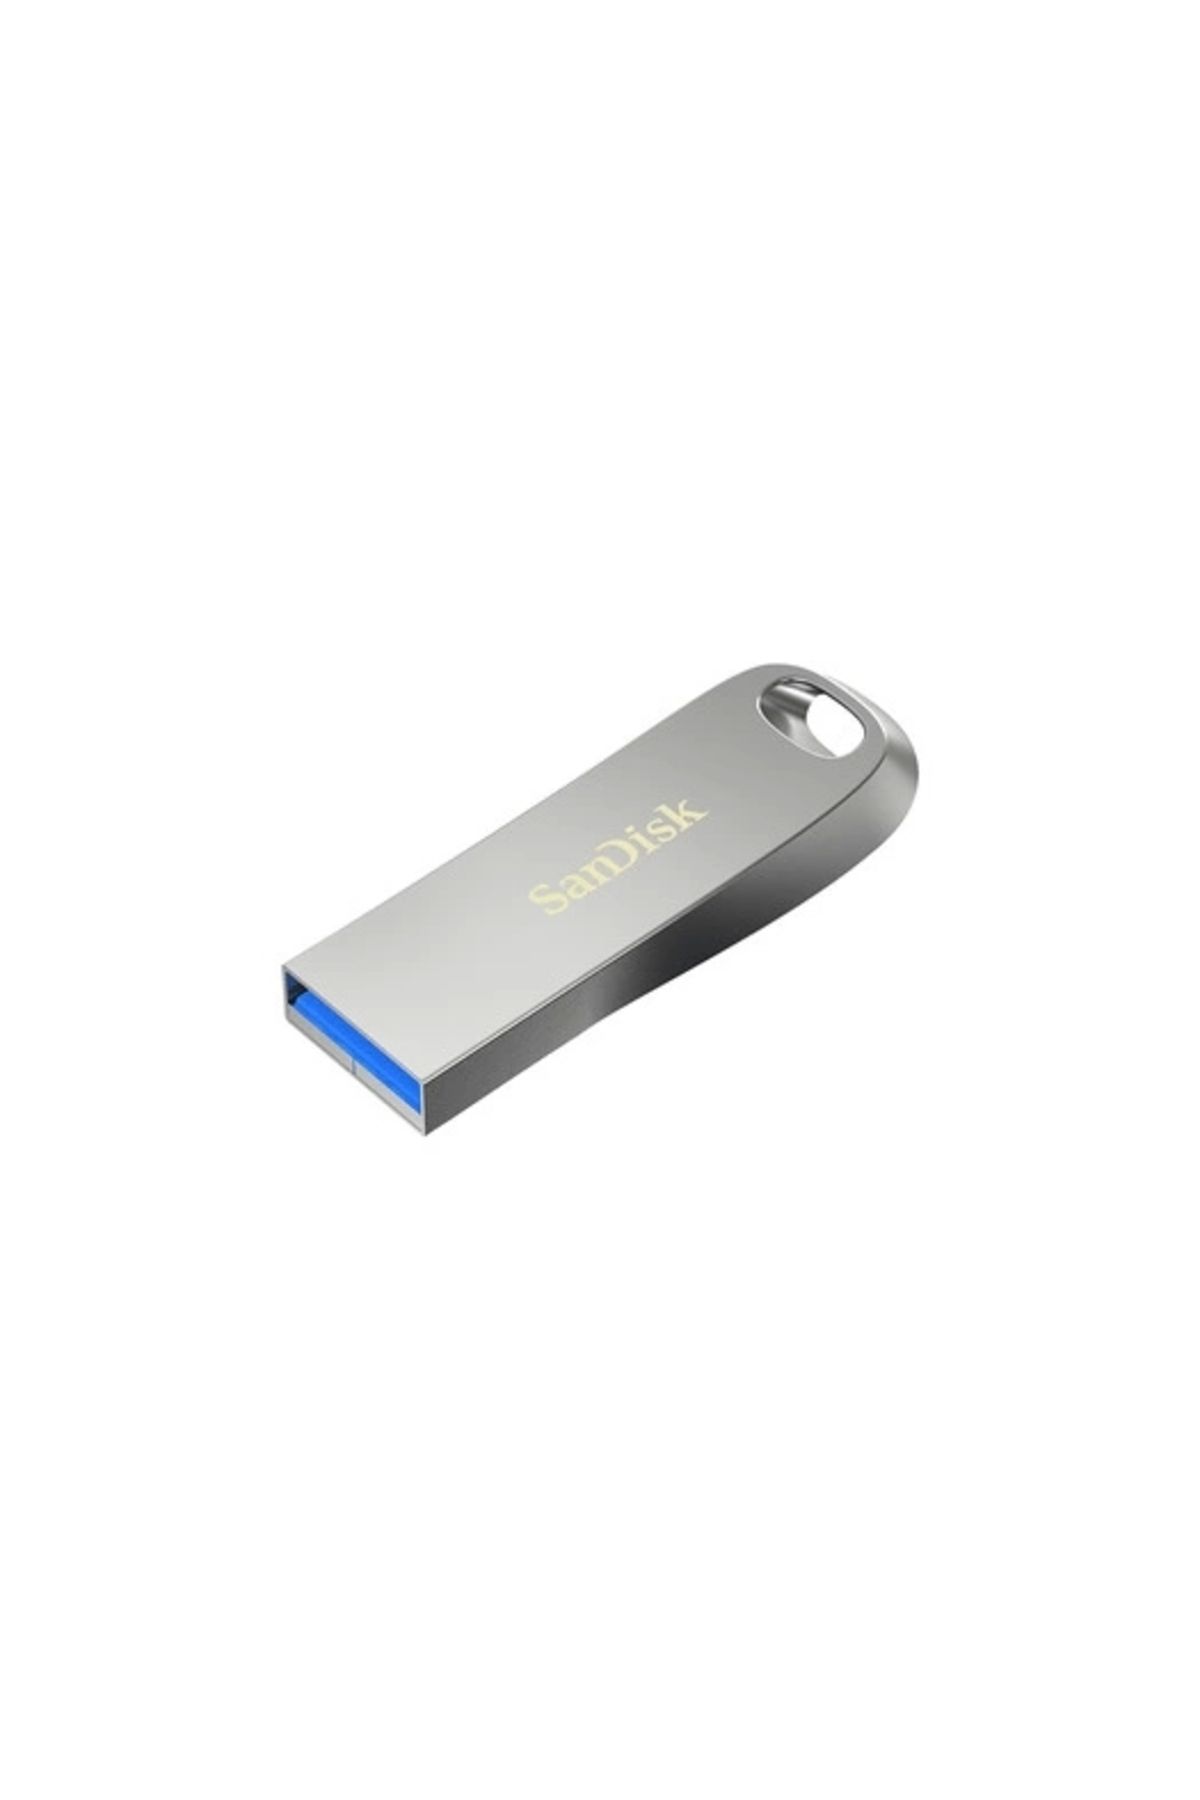 Sandisk Ultra Luxe 512gb, Usb 3.1 Flash Drive, 150 Mb/s